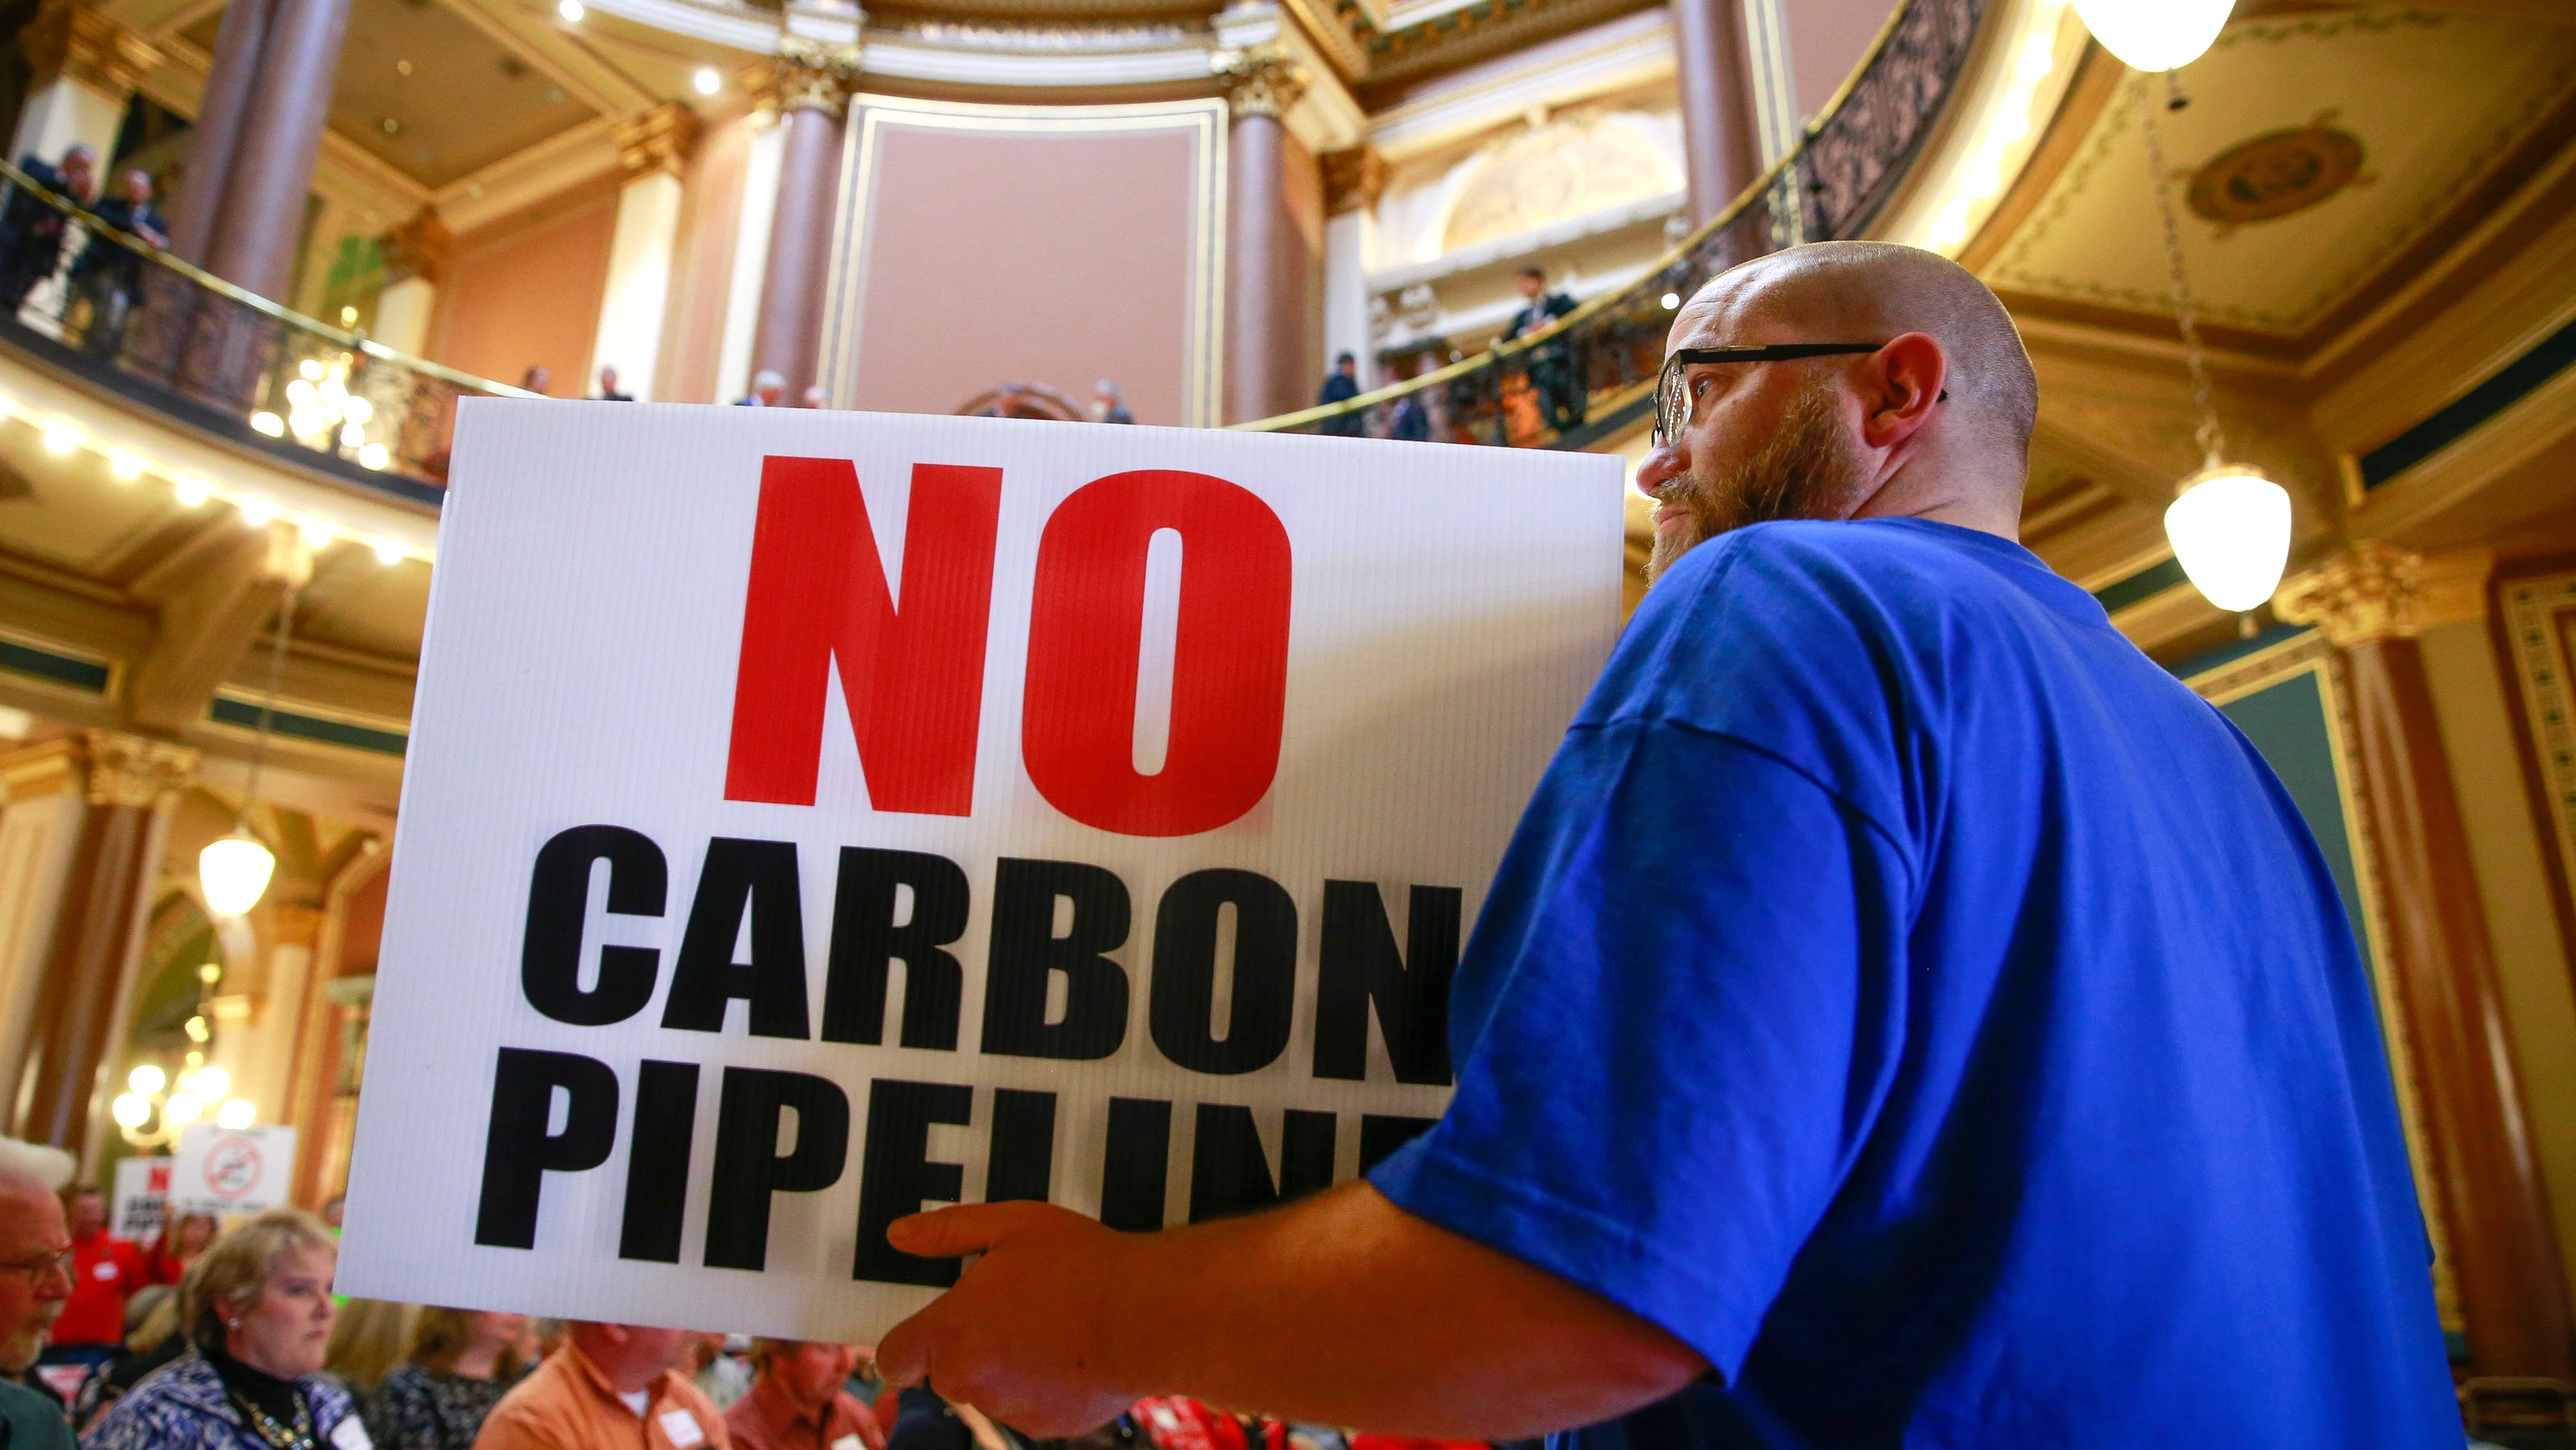 Opinion: We've done the research, and we oppose CO2 pipelines - Des Moines Register